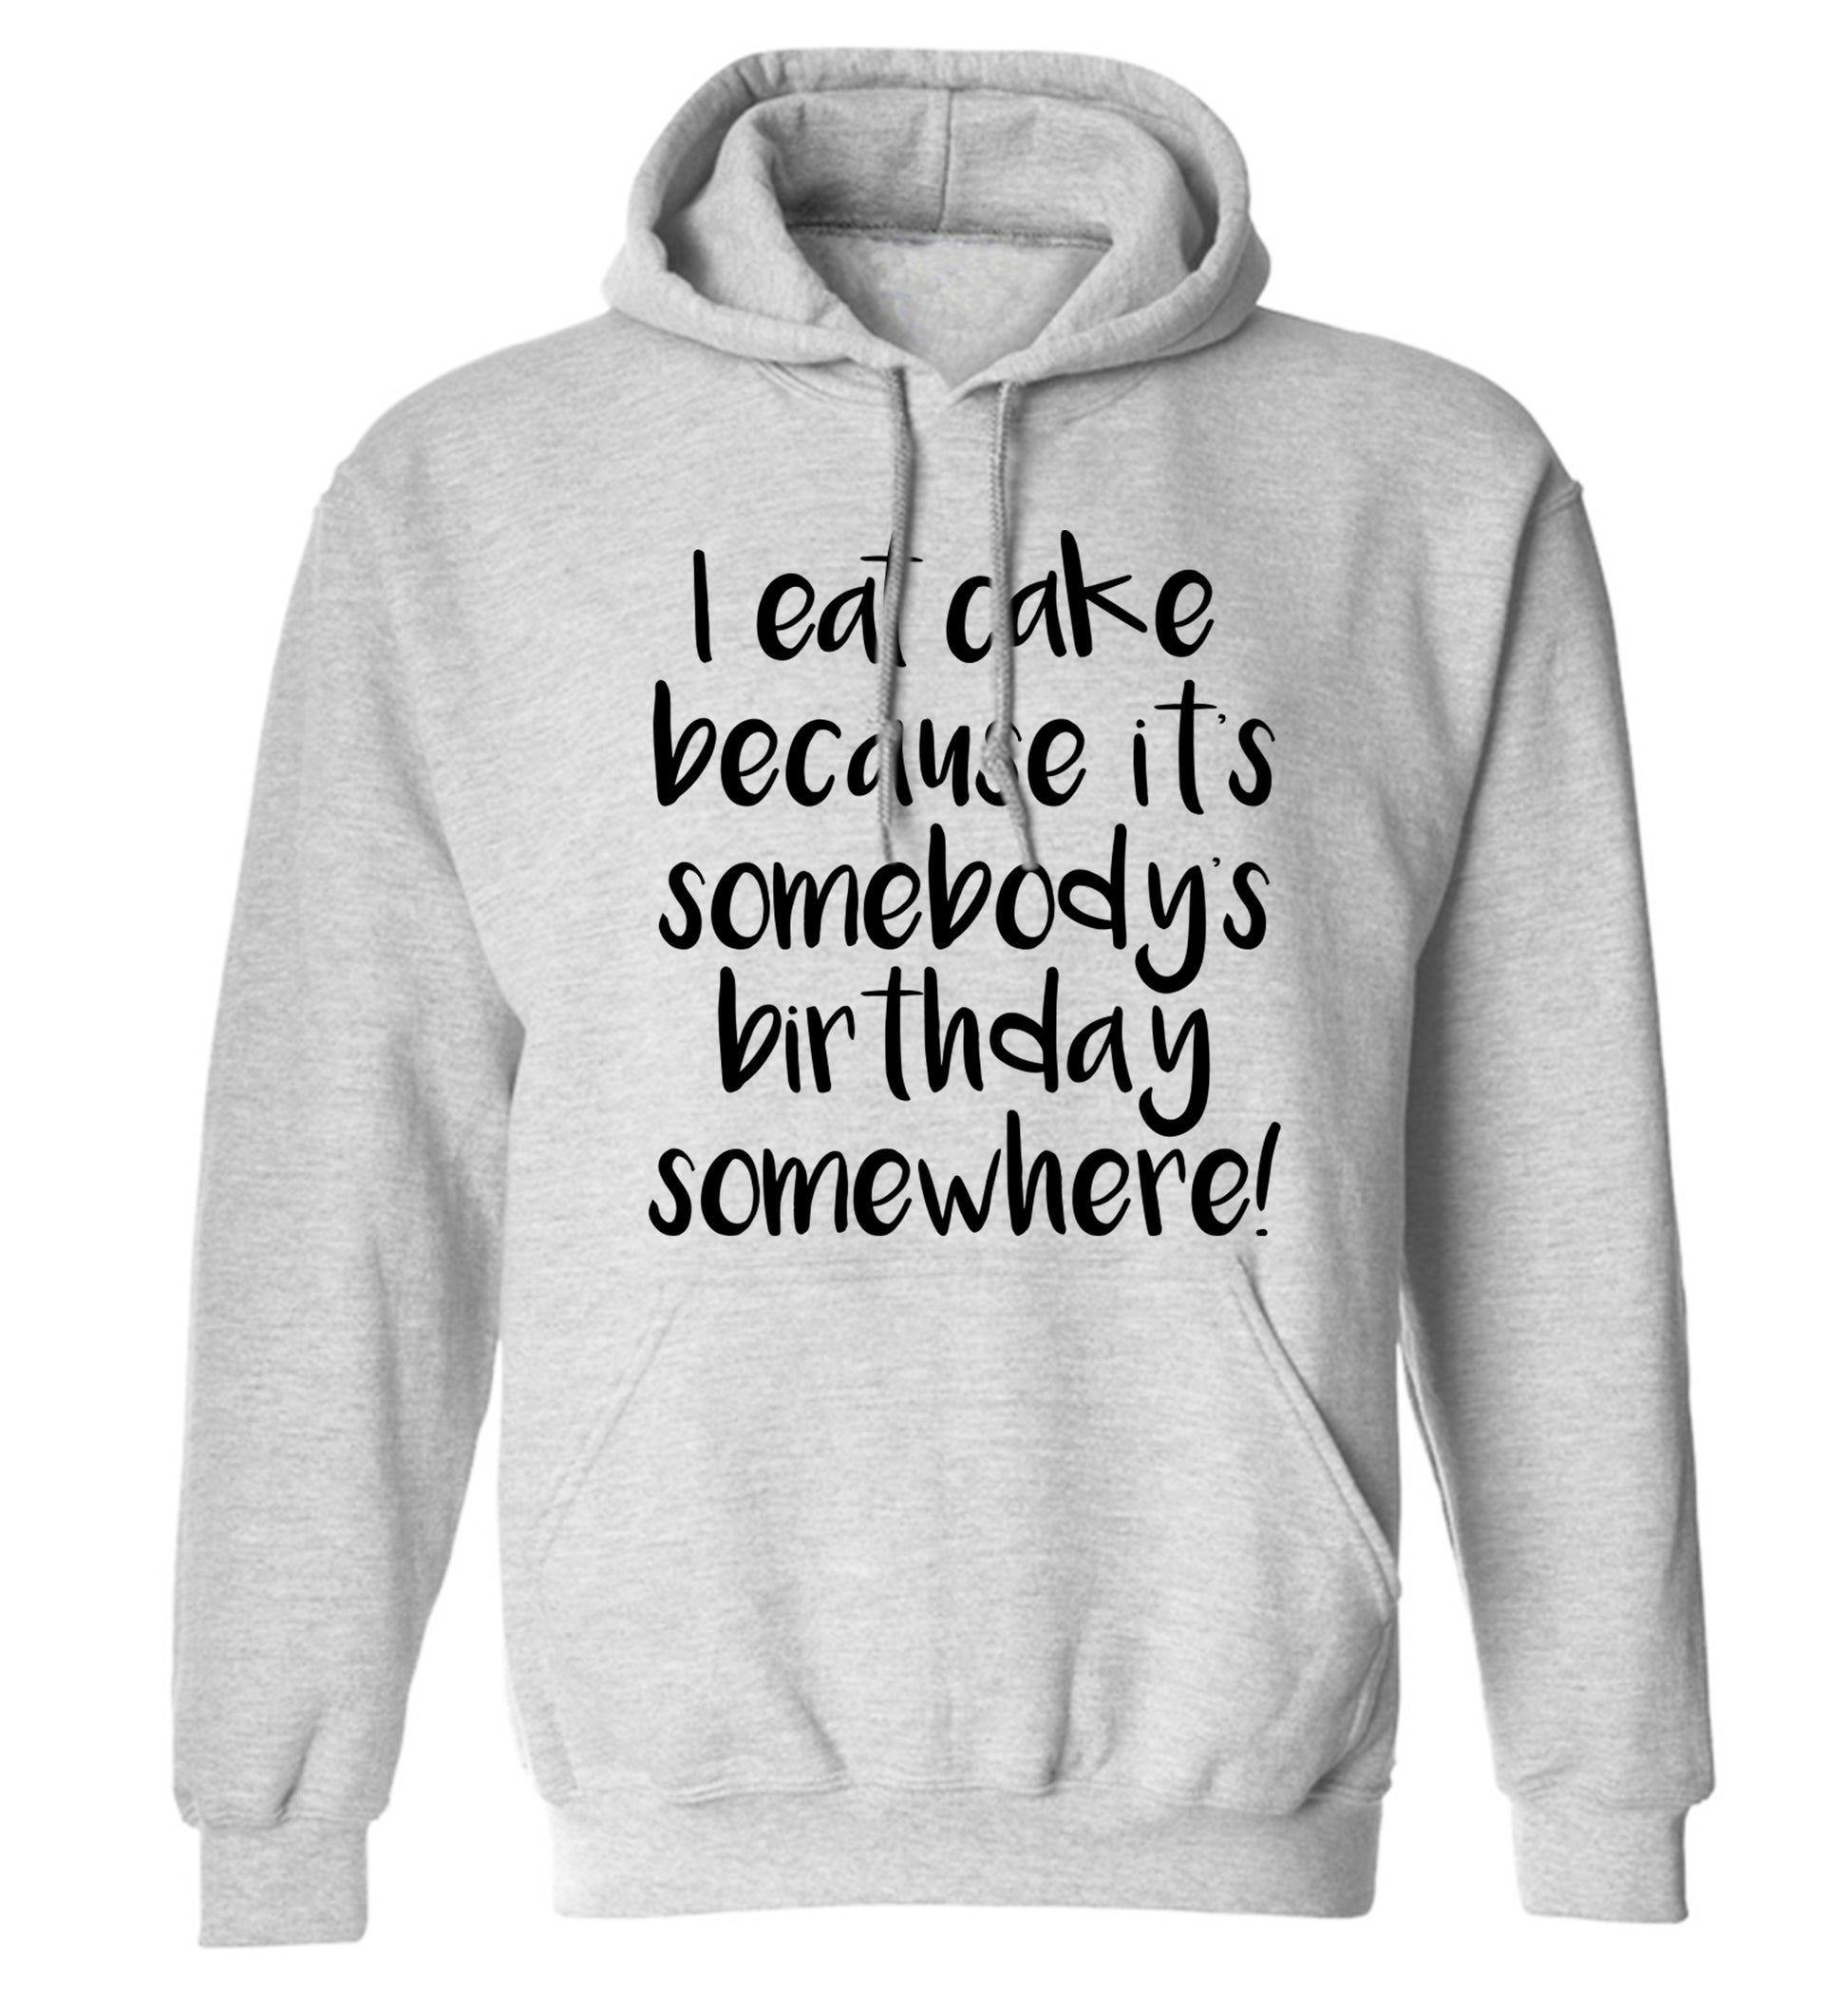 I eat cake because it's somebody's birthday somewhere! adults unisex grey hoodie 2XL